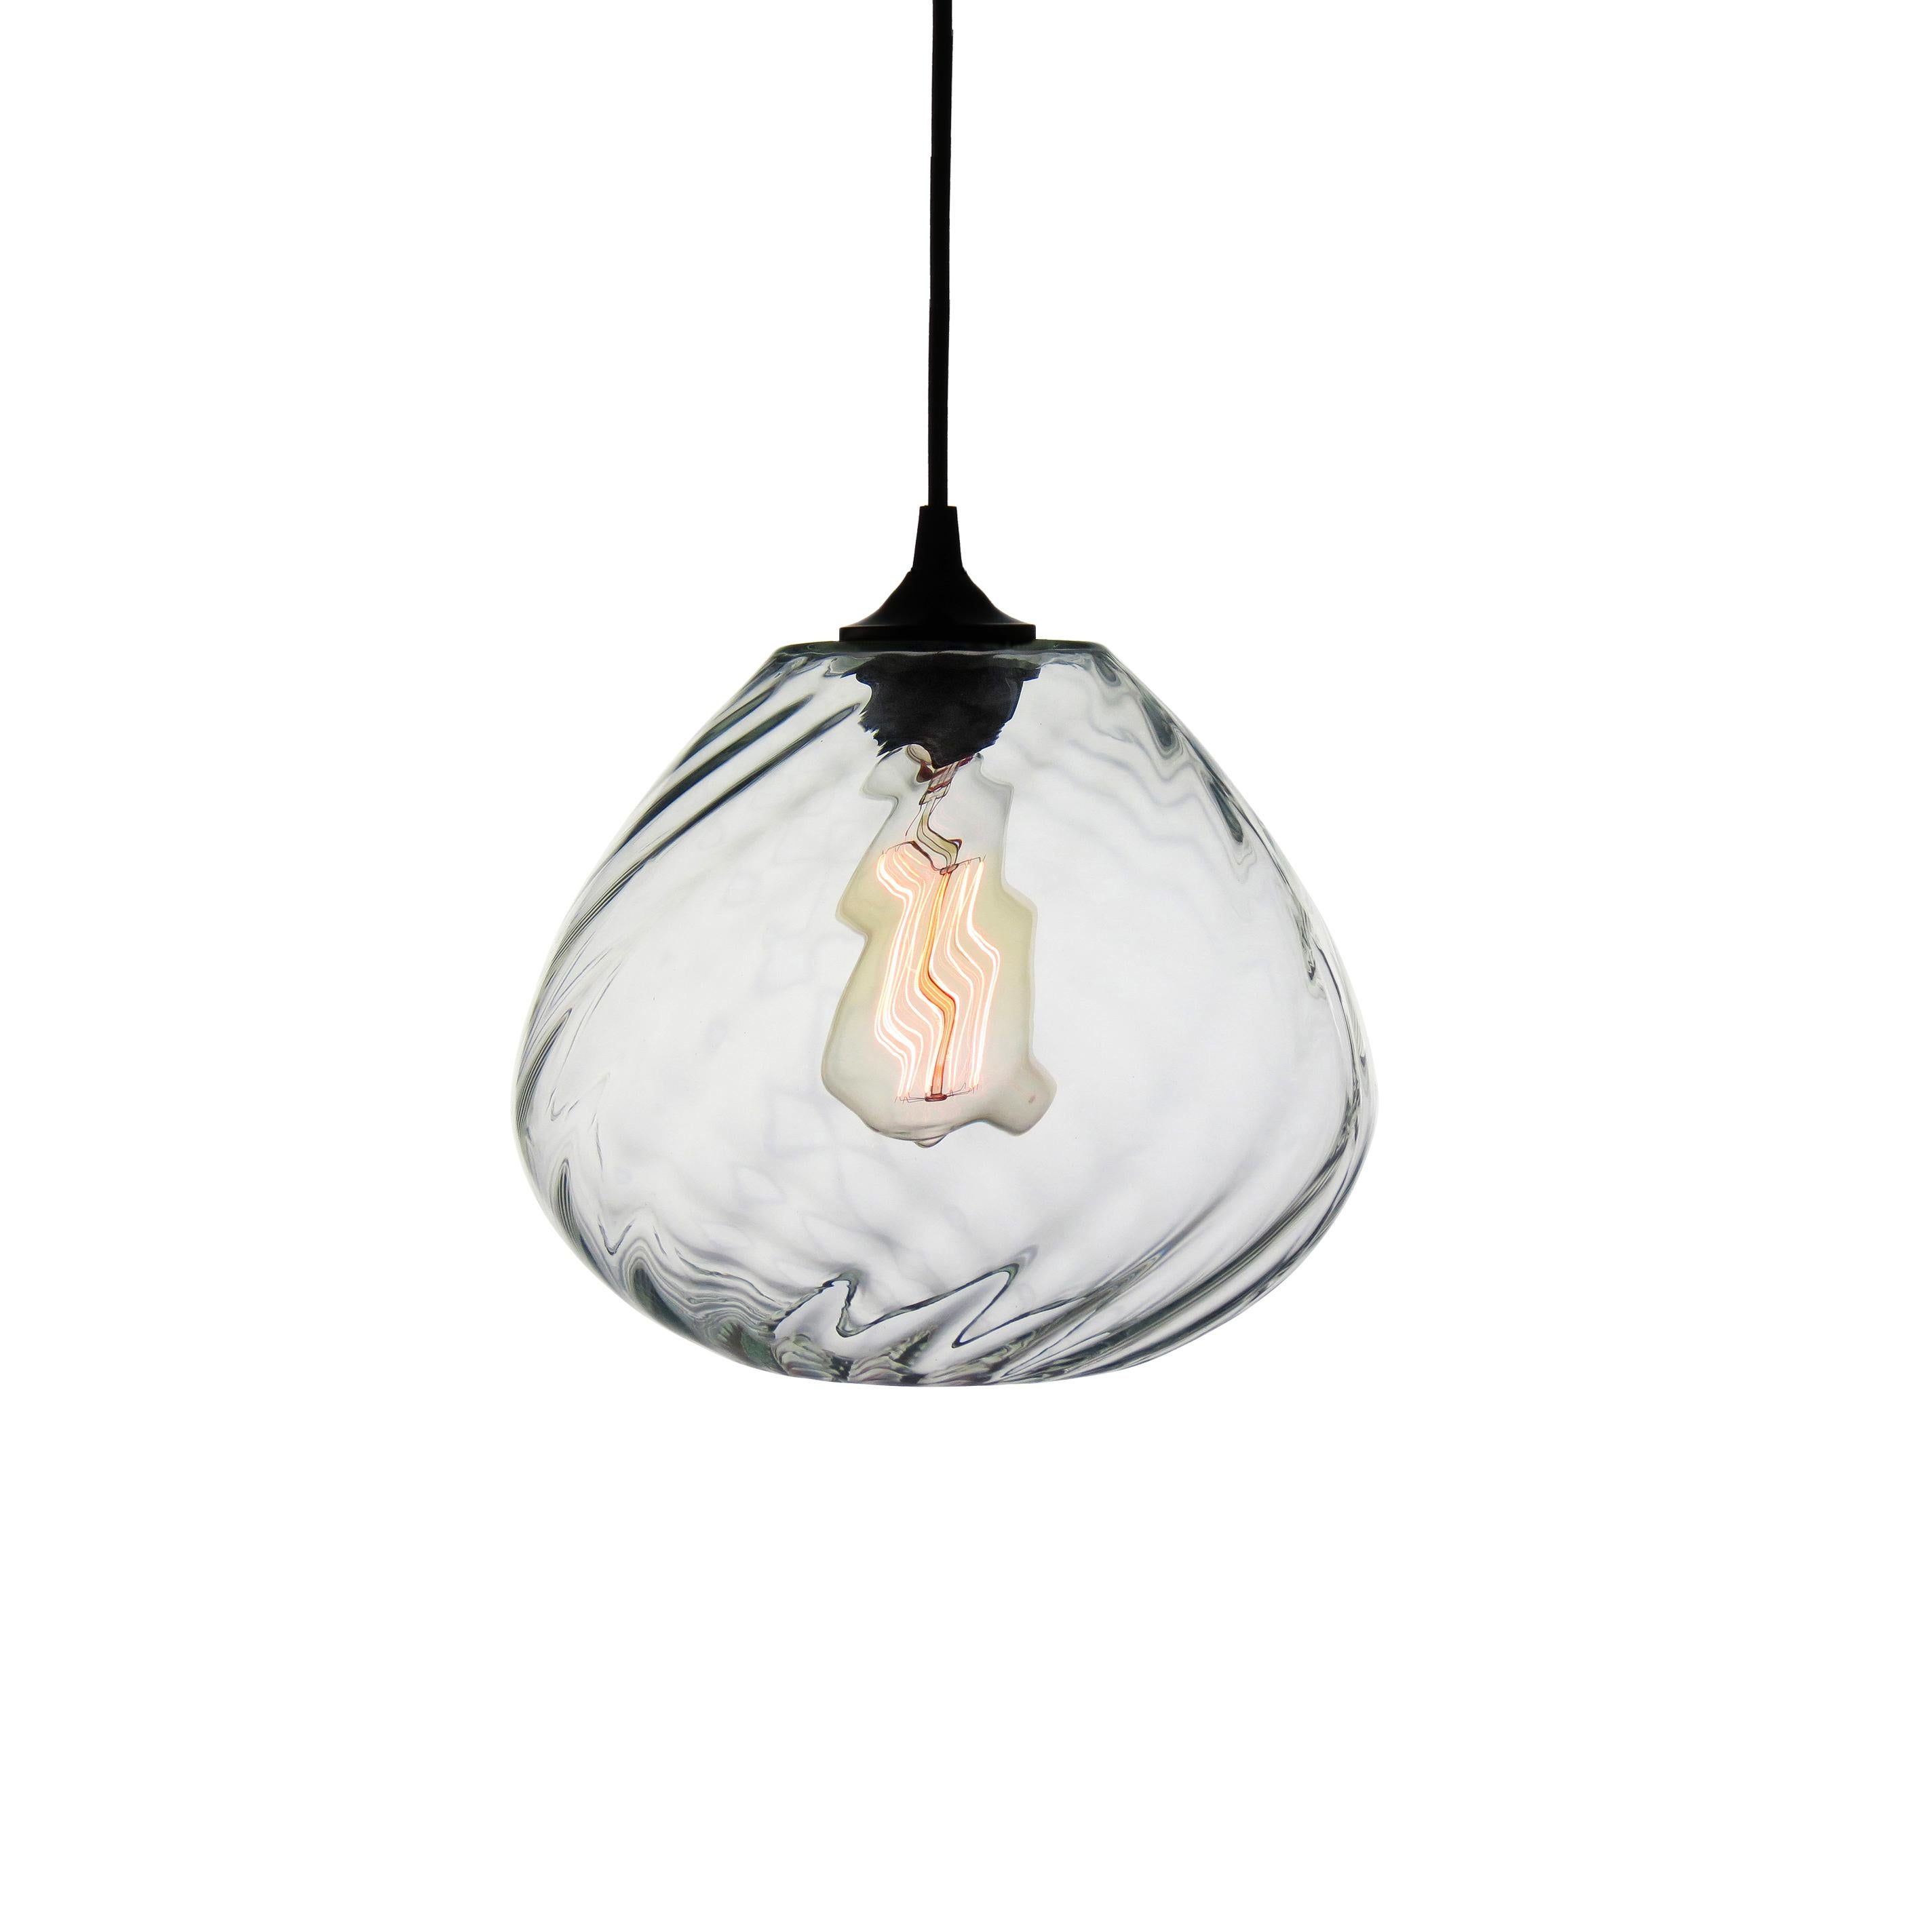 Transparent Hand Blown Glass Architectural Pendant Lamp with Optical Effect For Sale 3